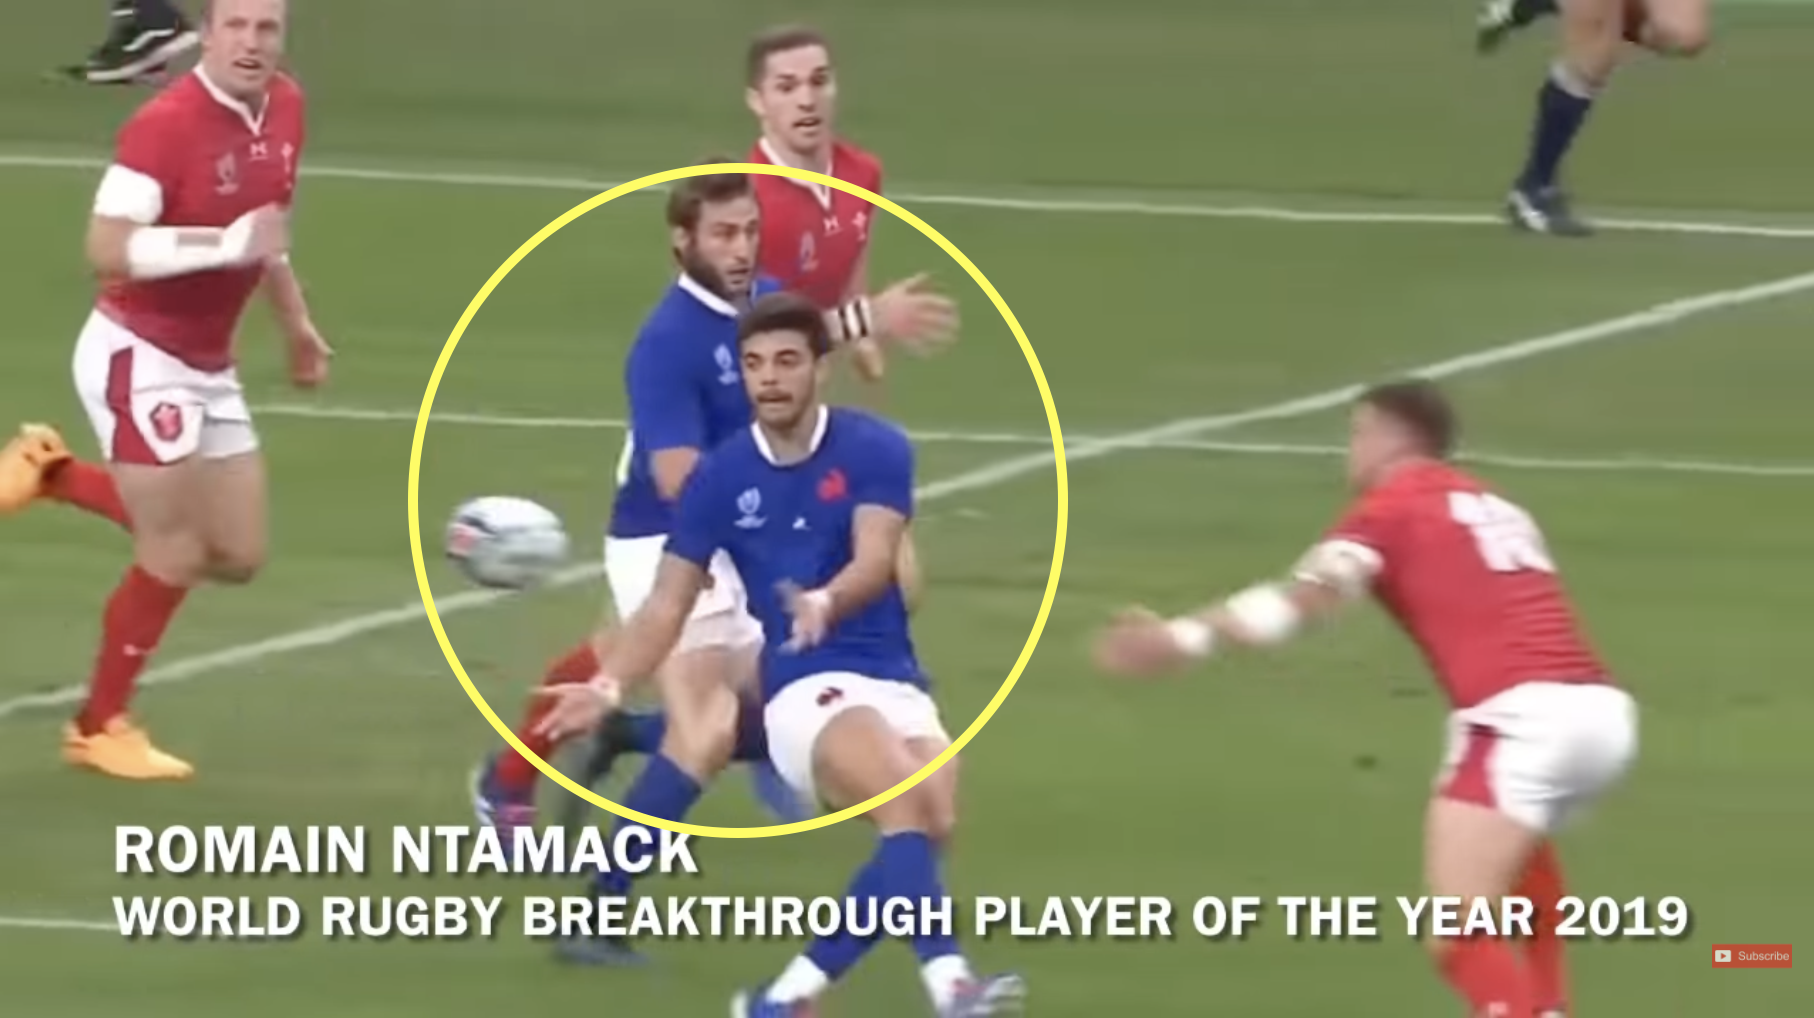 Top under-23 talents video shows why France will be terrifying at 2023 RWC